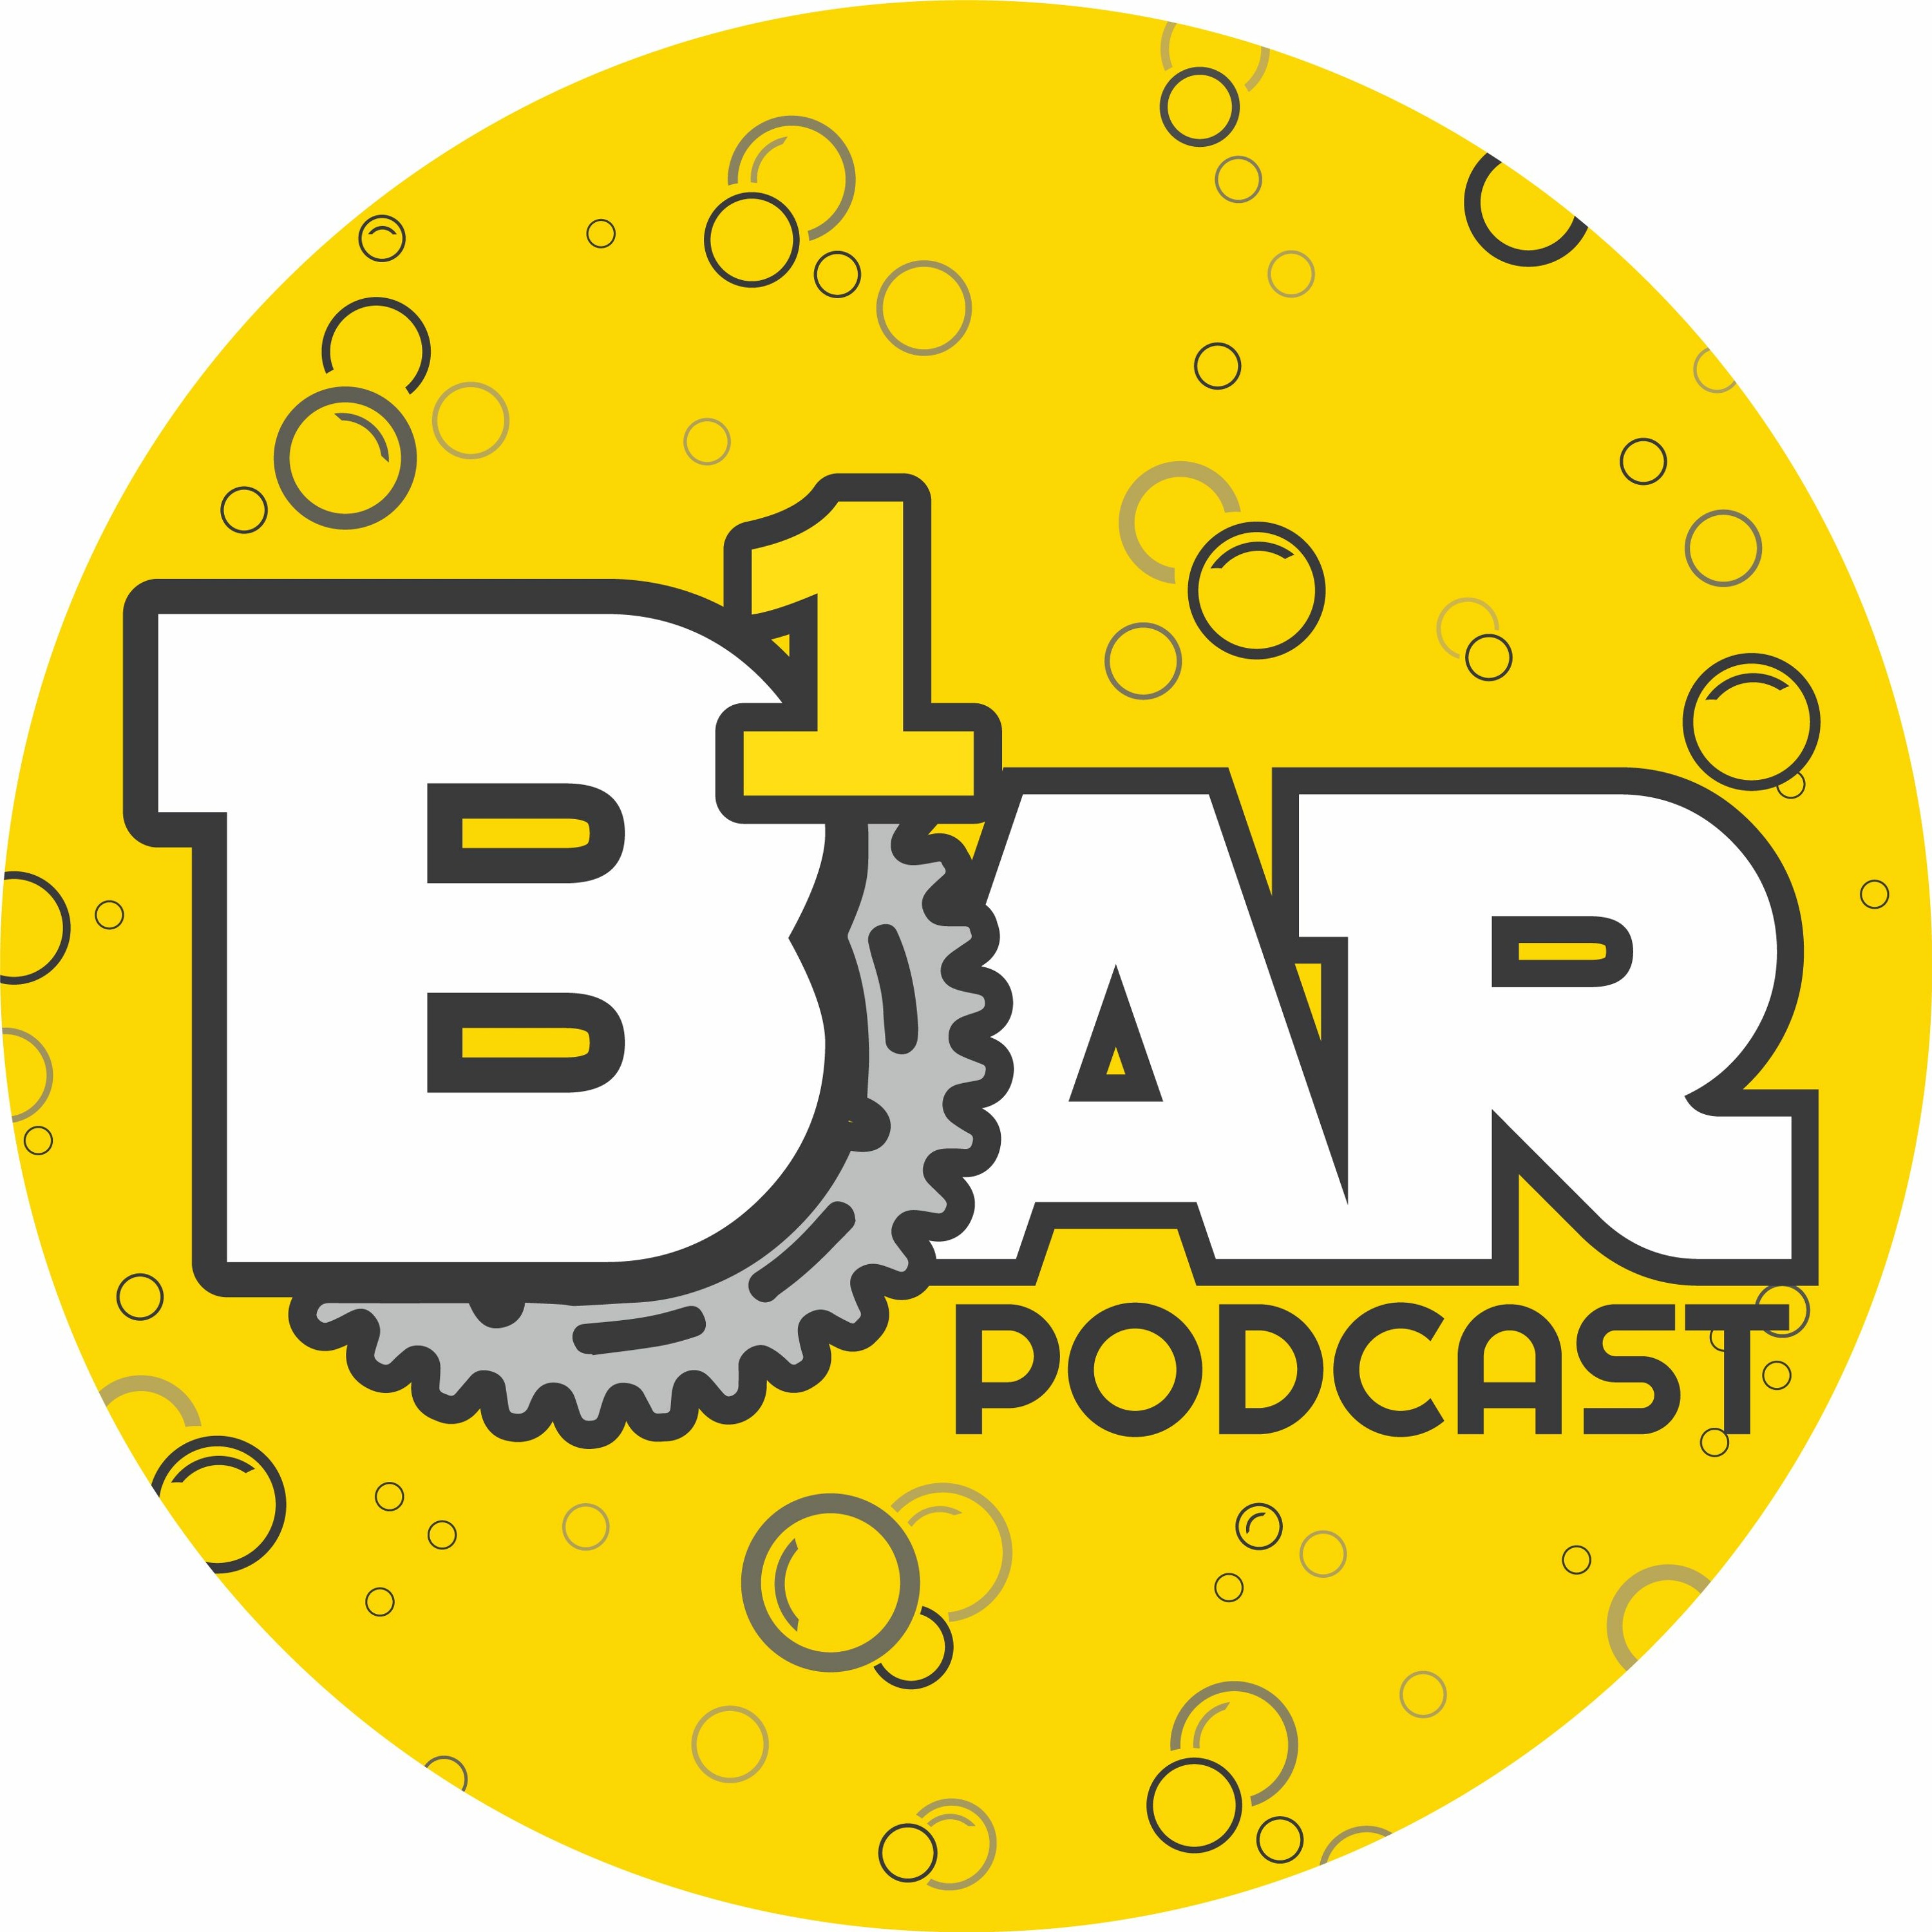 Ep. 175 - The Tinkering Cyclist